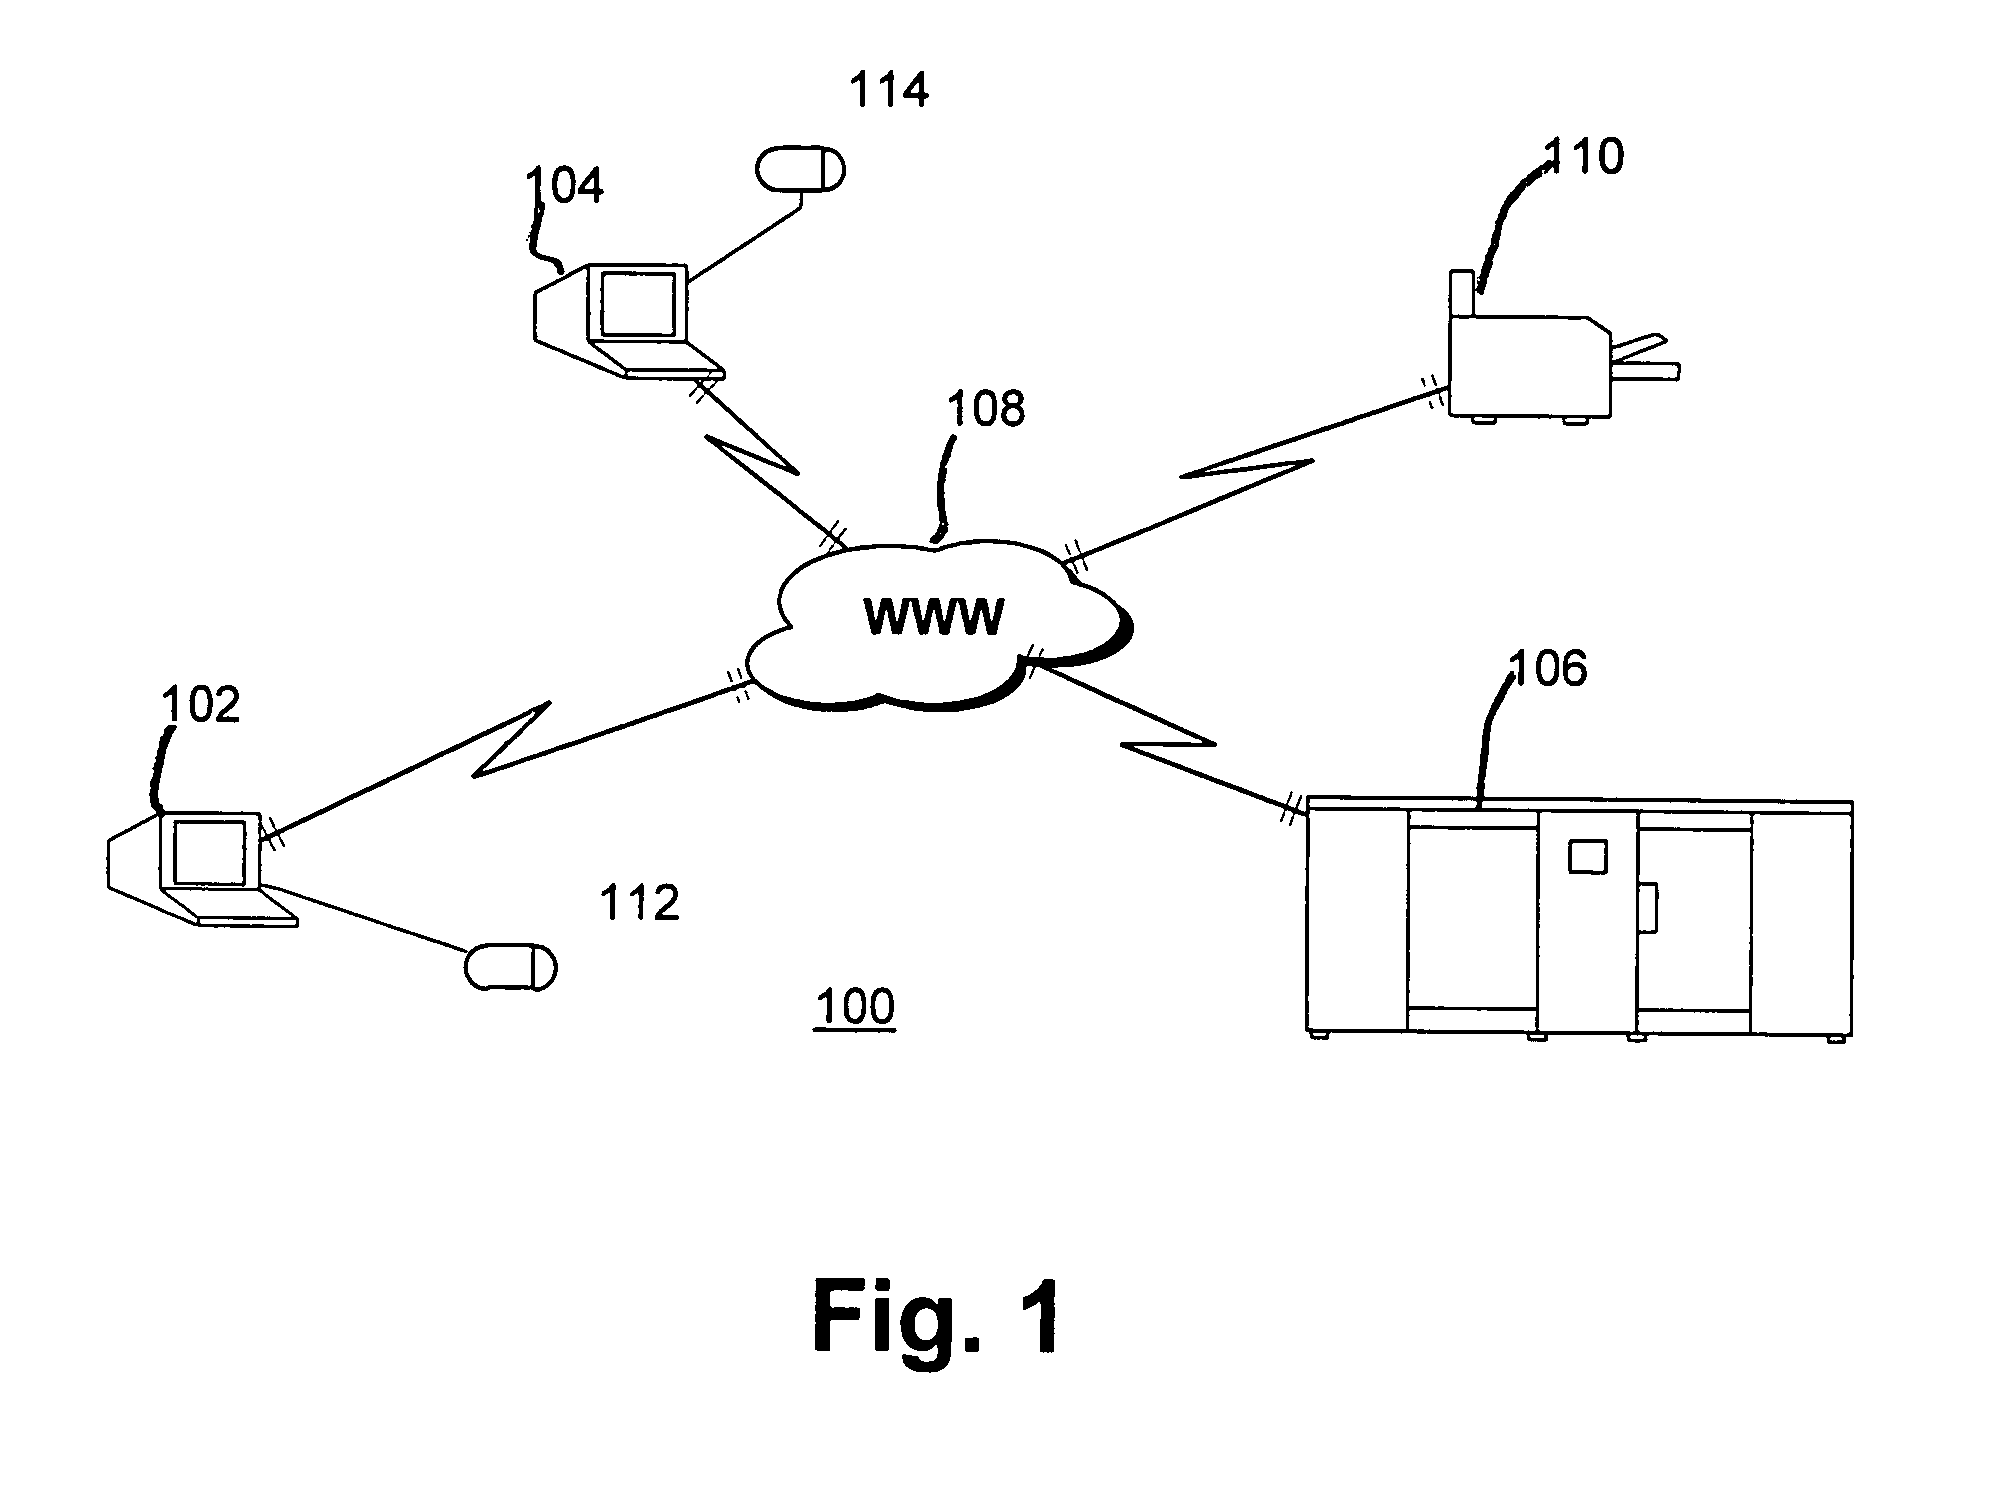 System, method and program product for automatically managing contracts